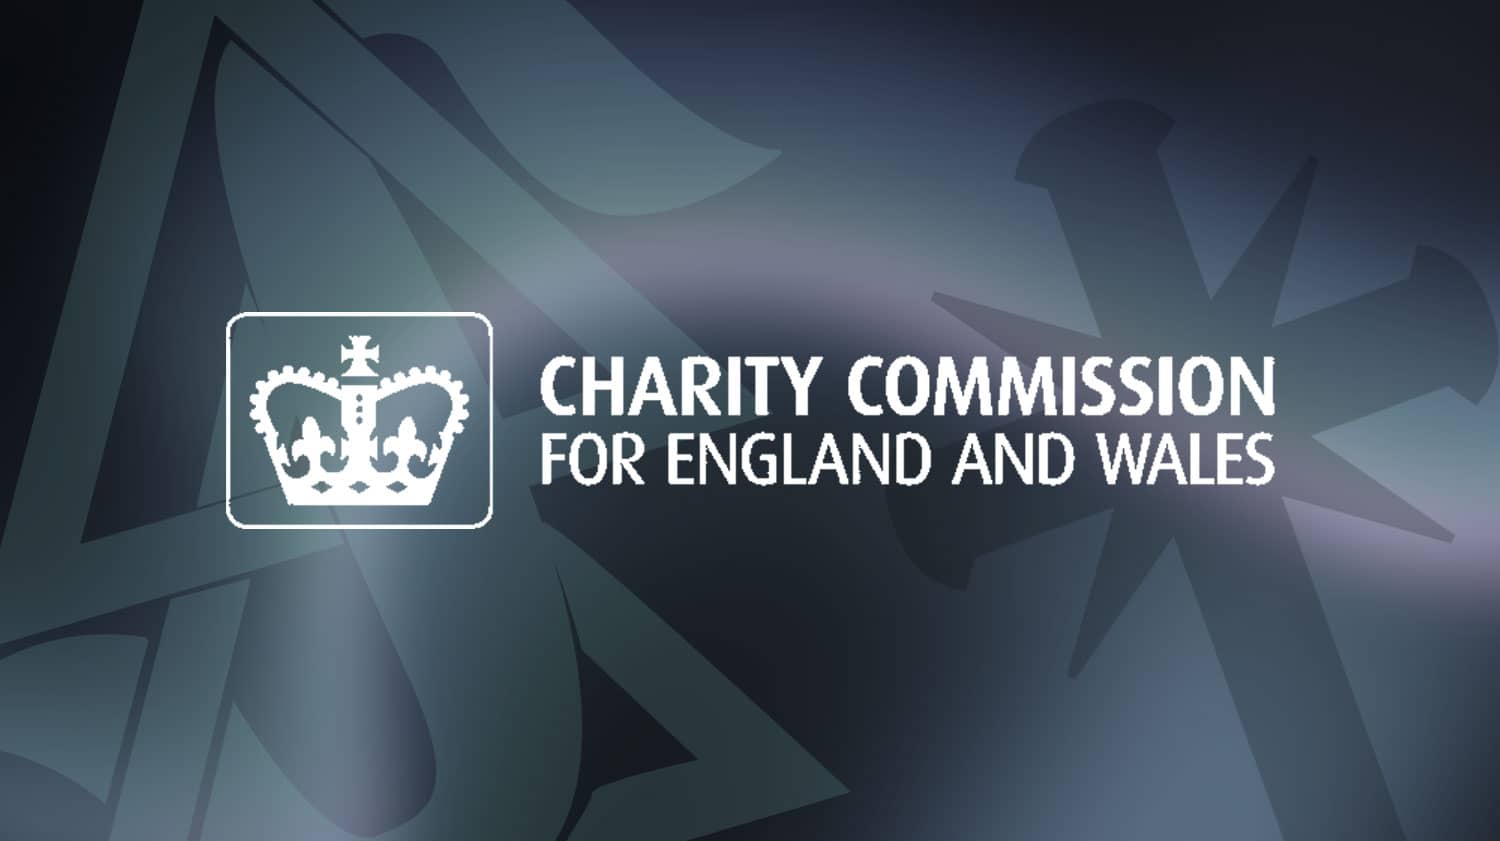 Scientology and the Charity Commission